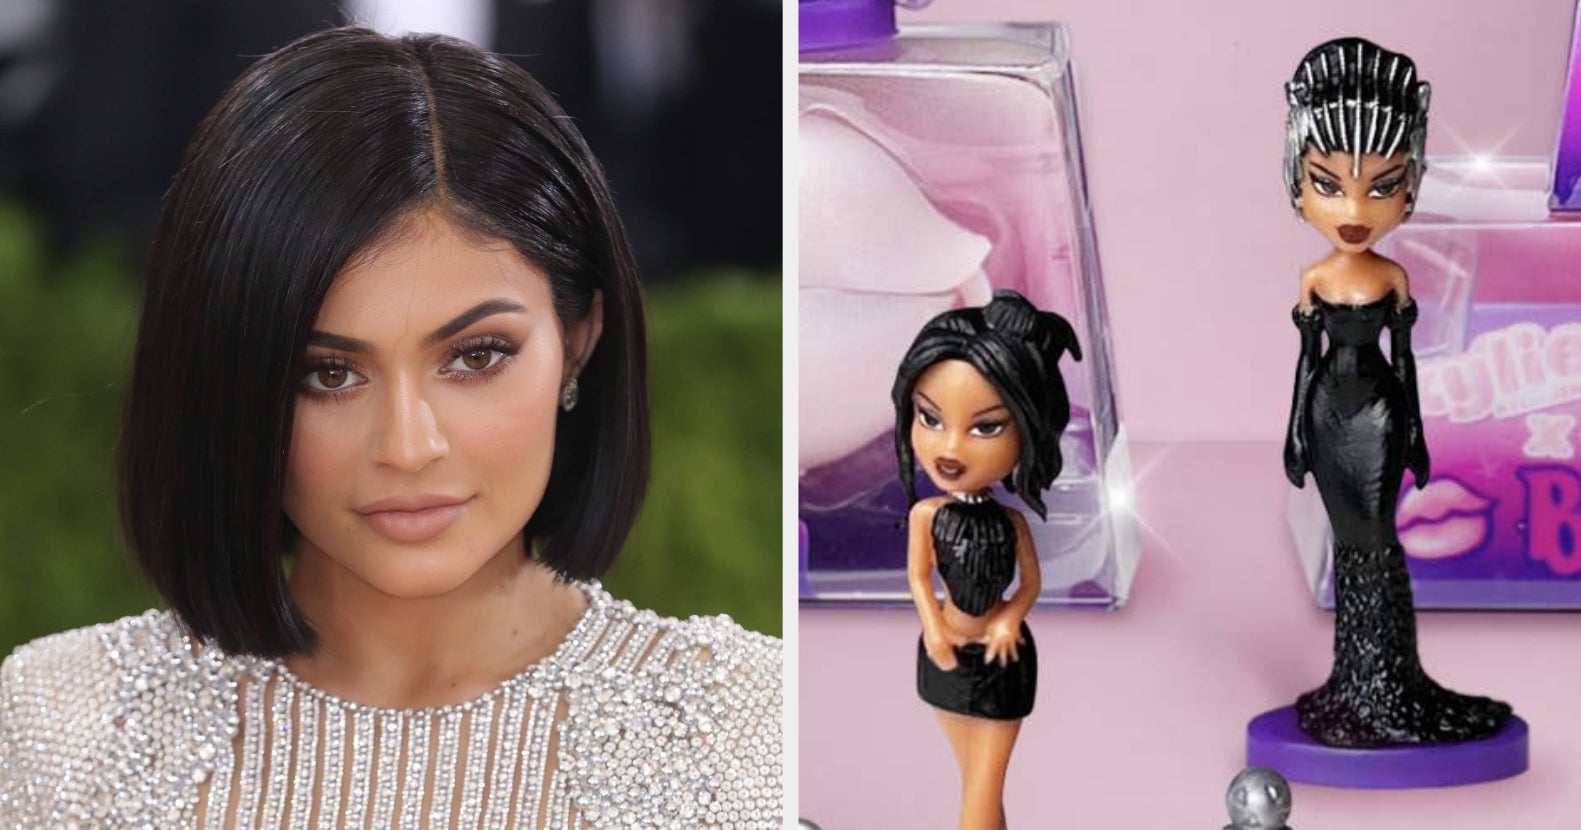 Kylie Jenner's Bratz doll causes outrage due to skin tone